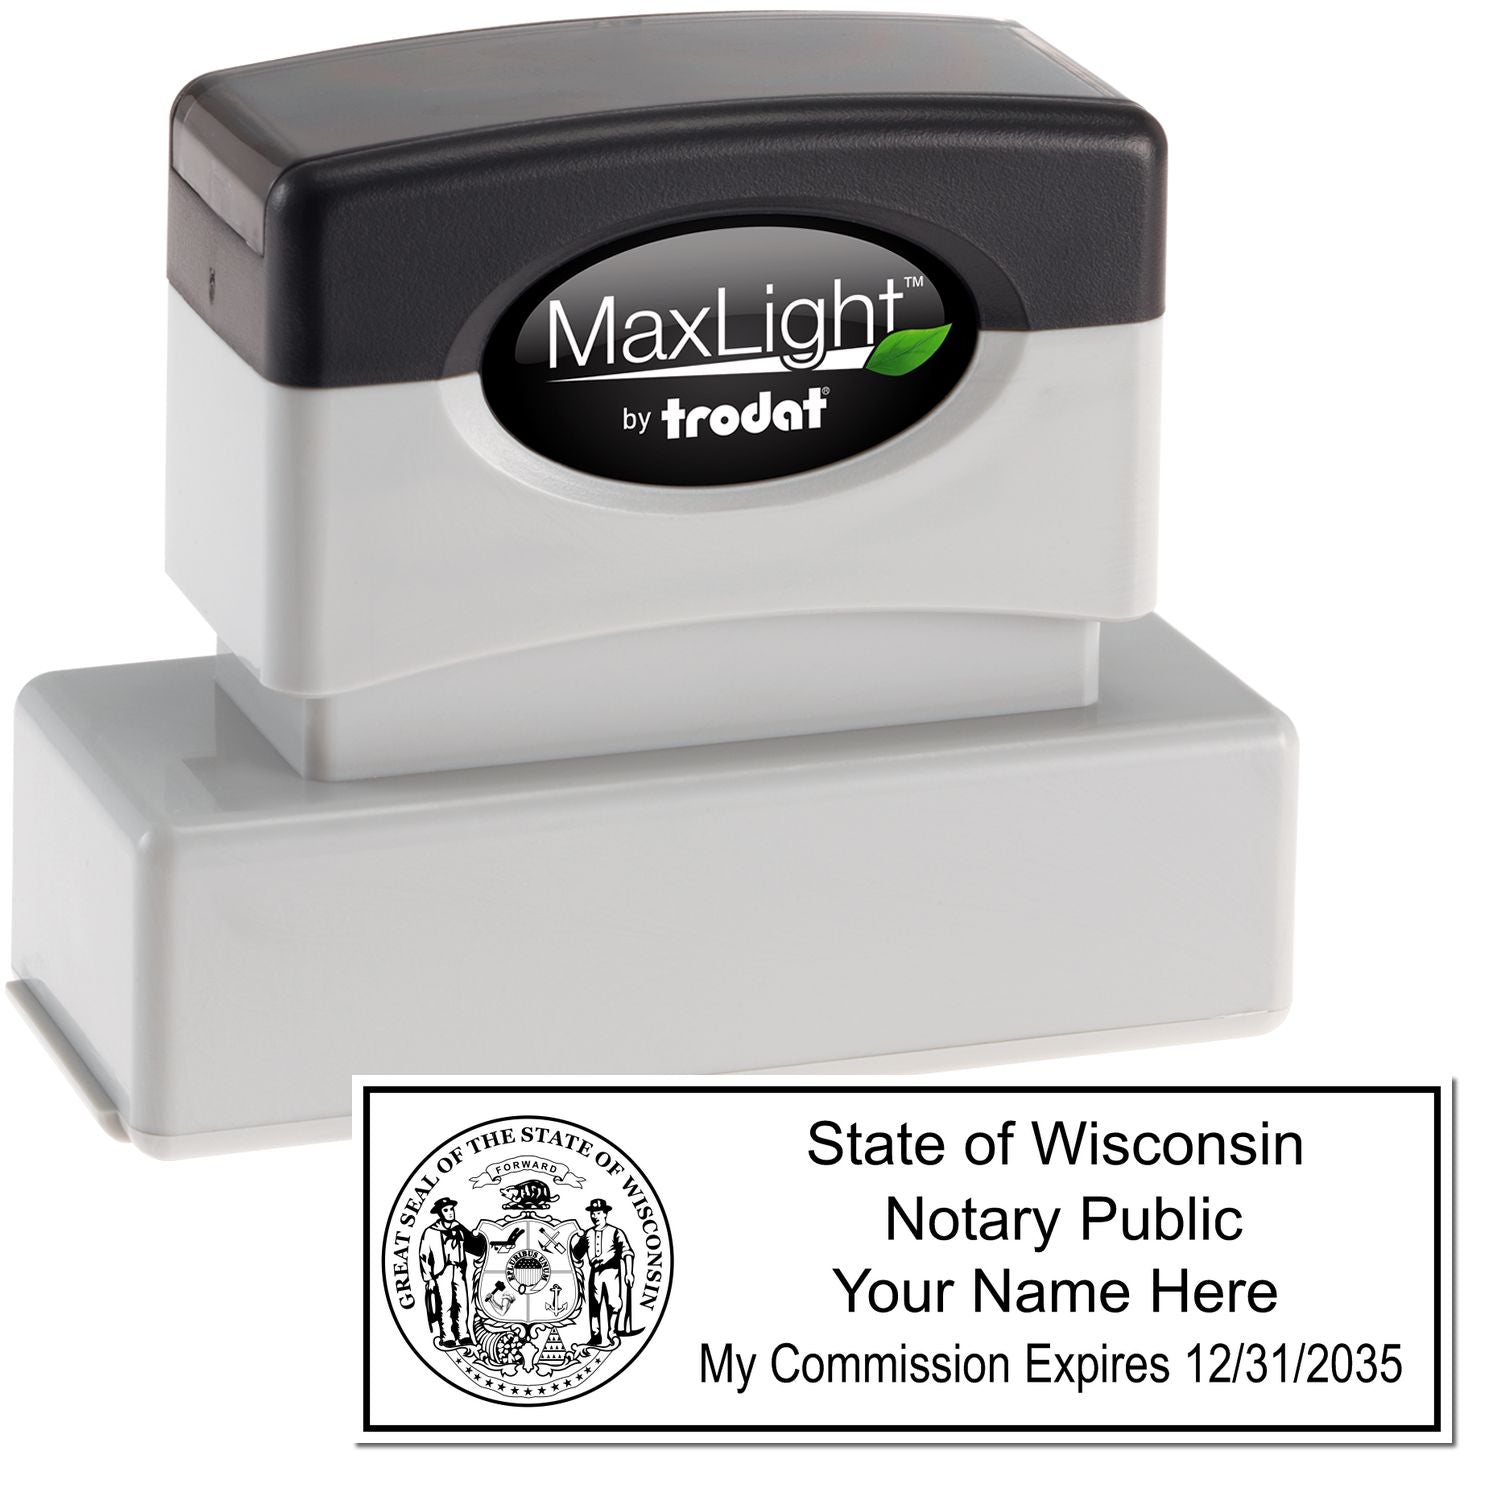 The main image for the MaxLight Premium Pre-Inked Wisconsin State Seal Notarial Stamp depicting a sample of the imprint and electronic files